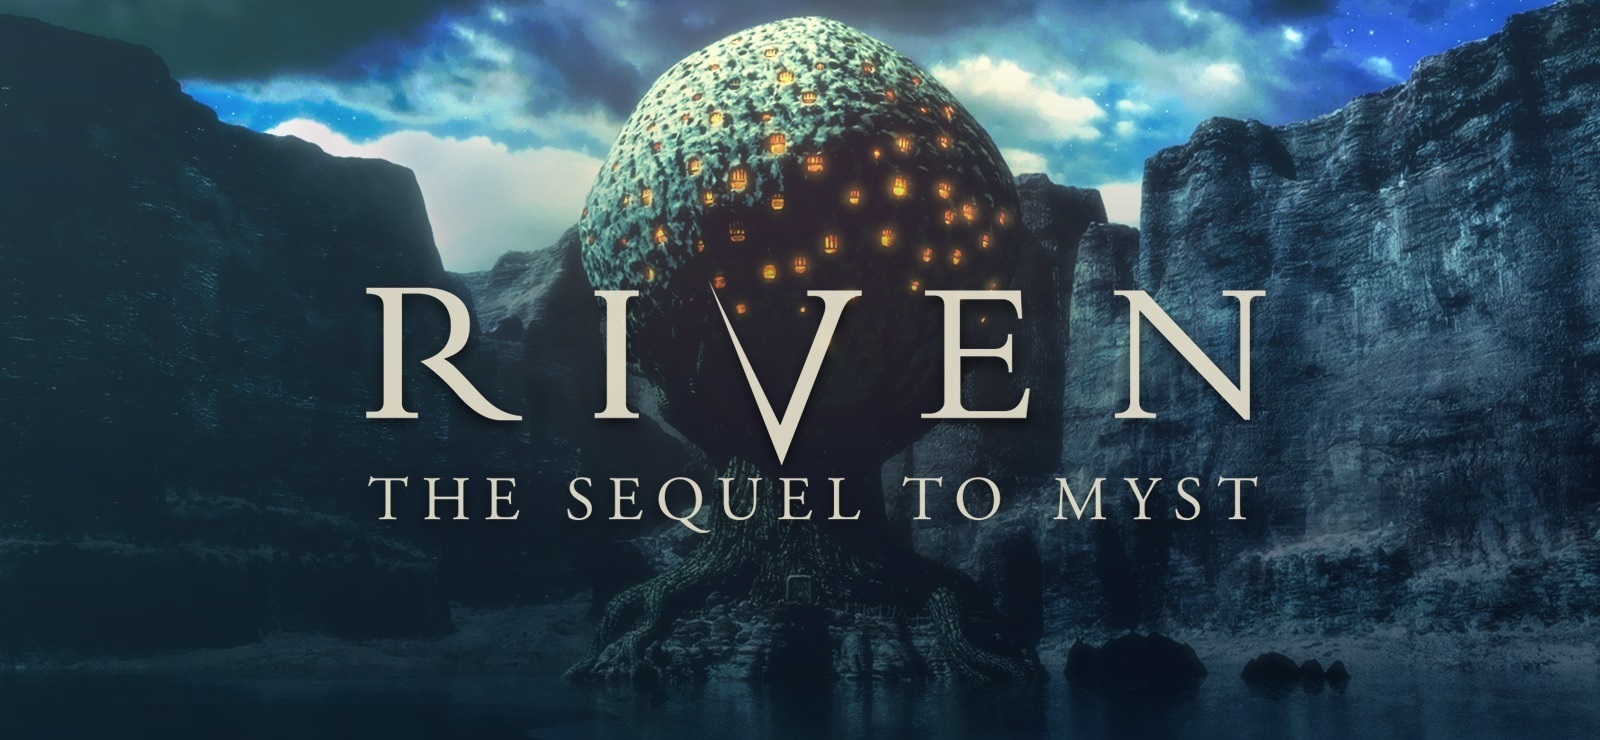 Riven_The_Sequel_to_Myst_1